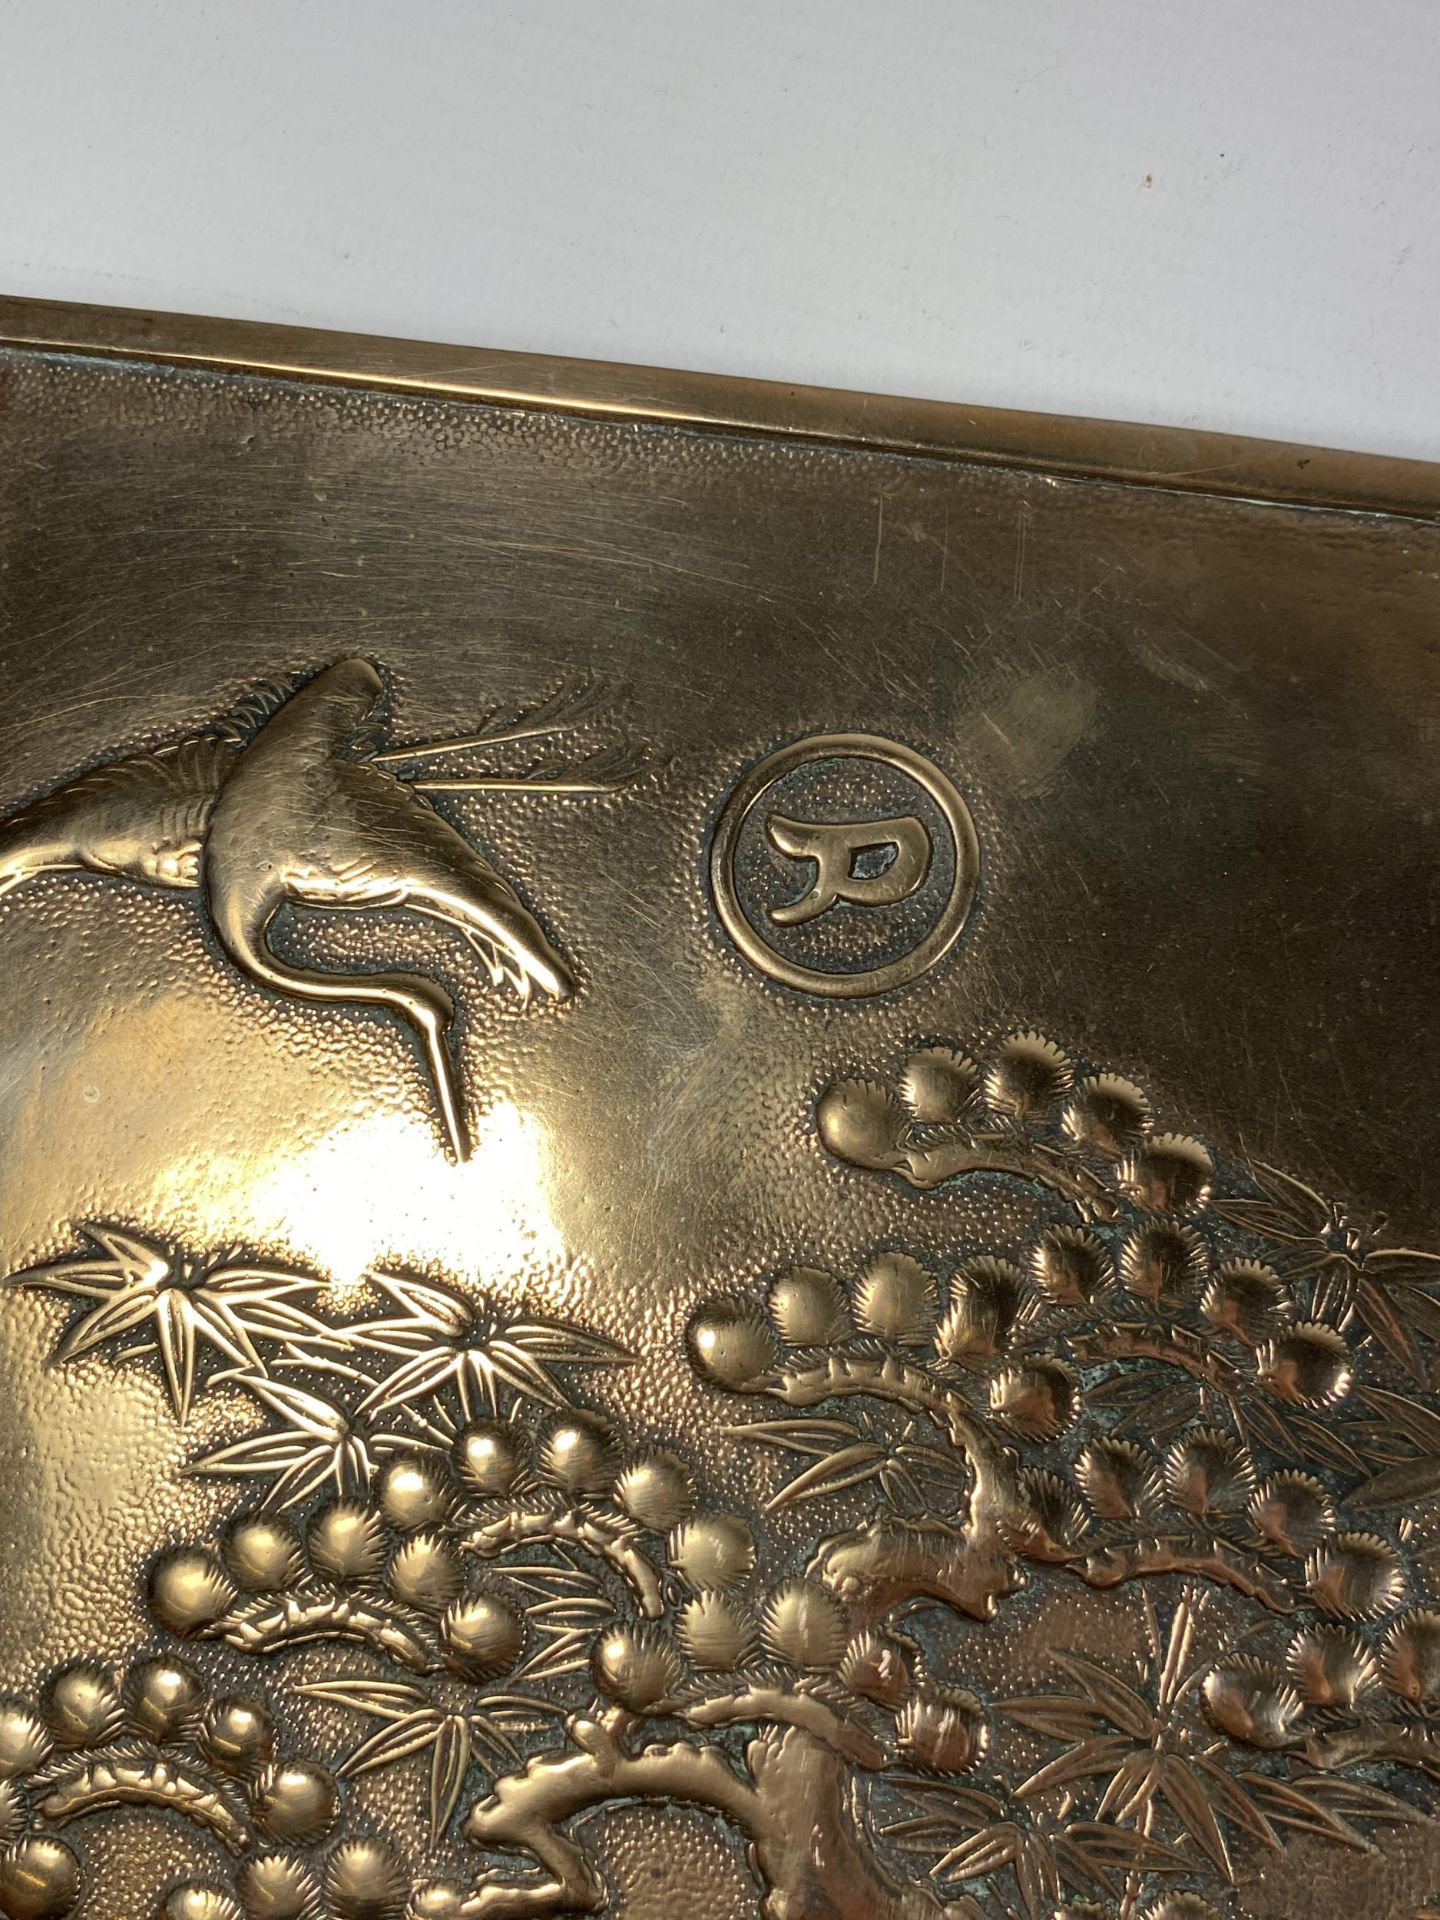 A PAIR OF JAPANESE MEIJI PERIOD (1868-1912) HEAVY BRONZE MIRROR PLAQUES WITH CRANE DESIGN, 23 X 20CM - Image 4 of 9